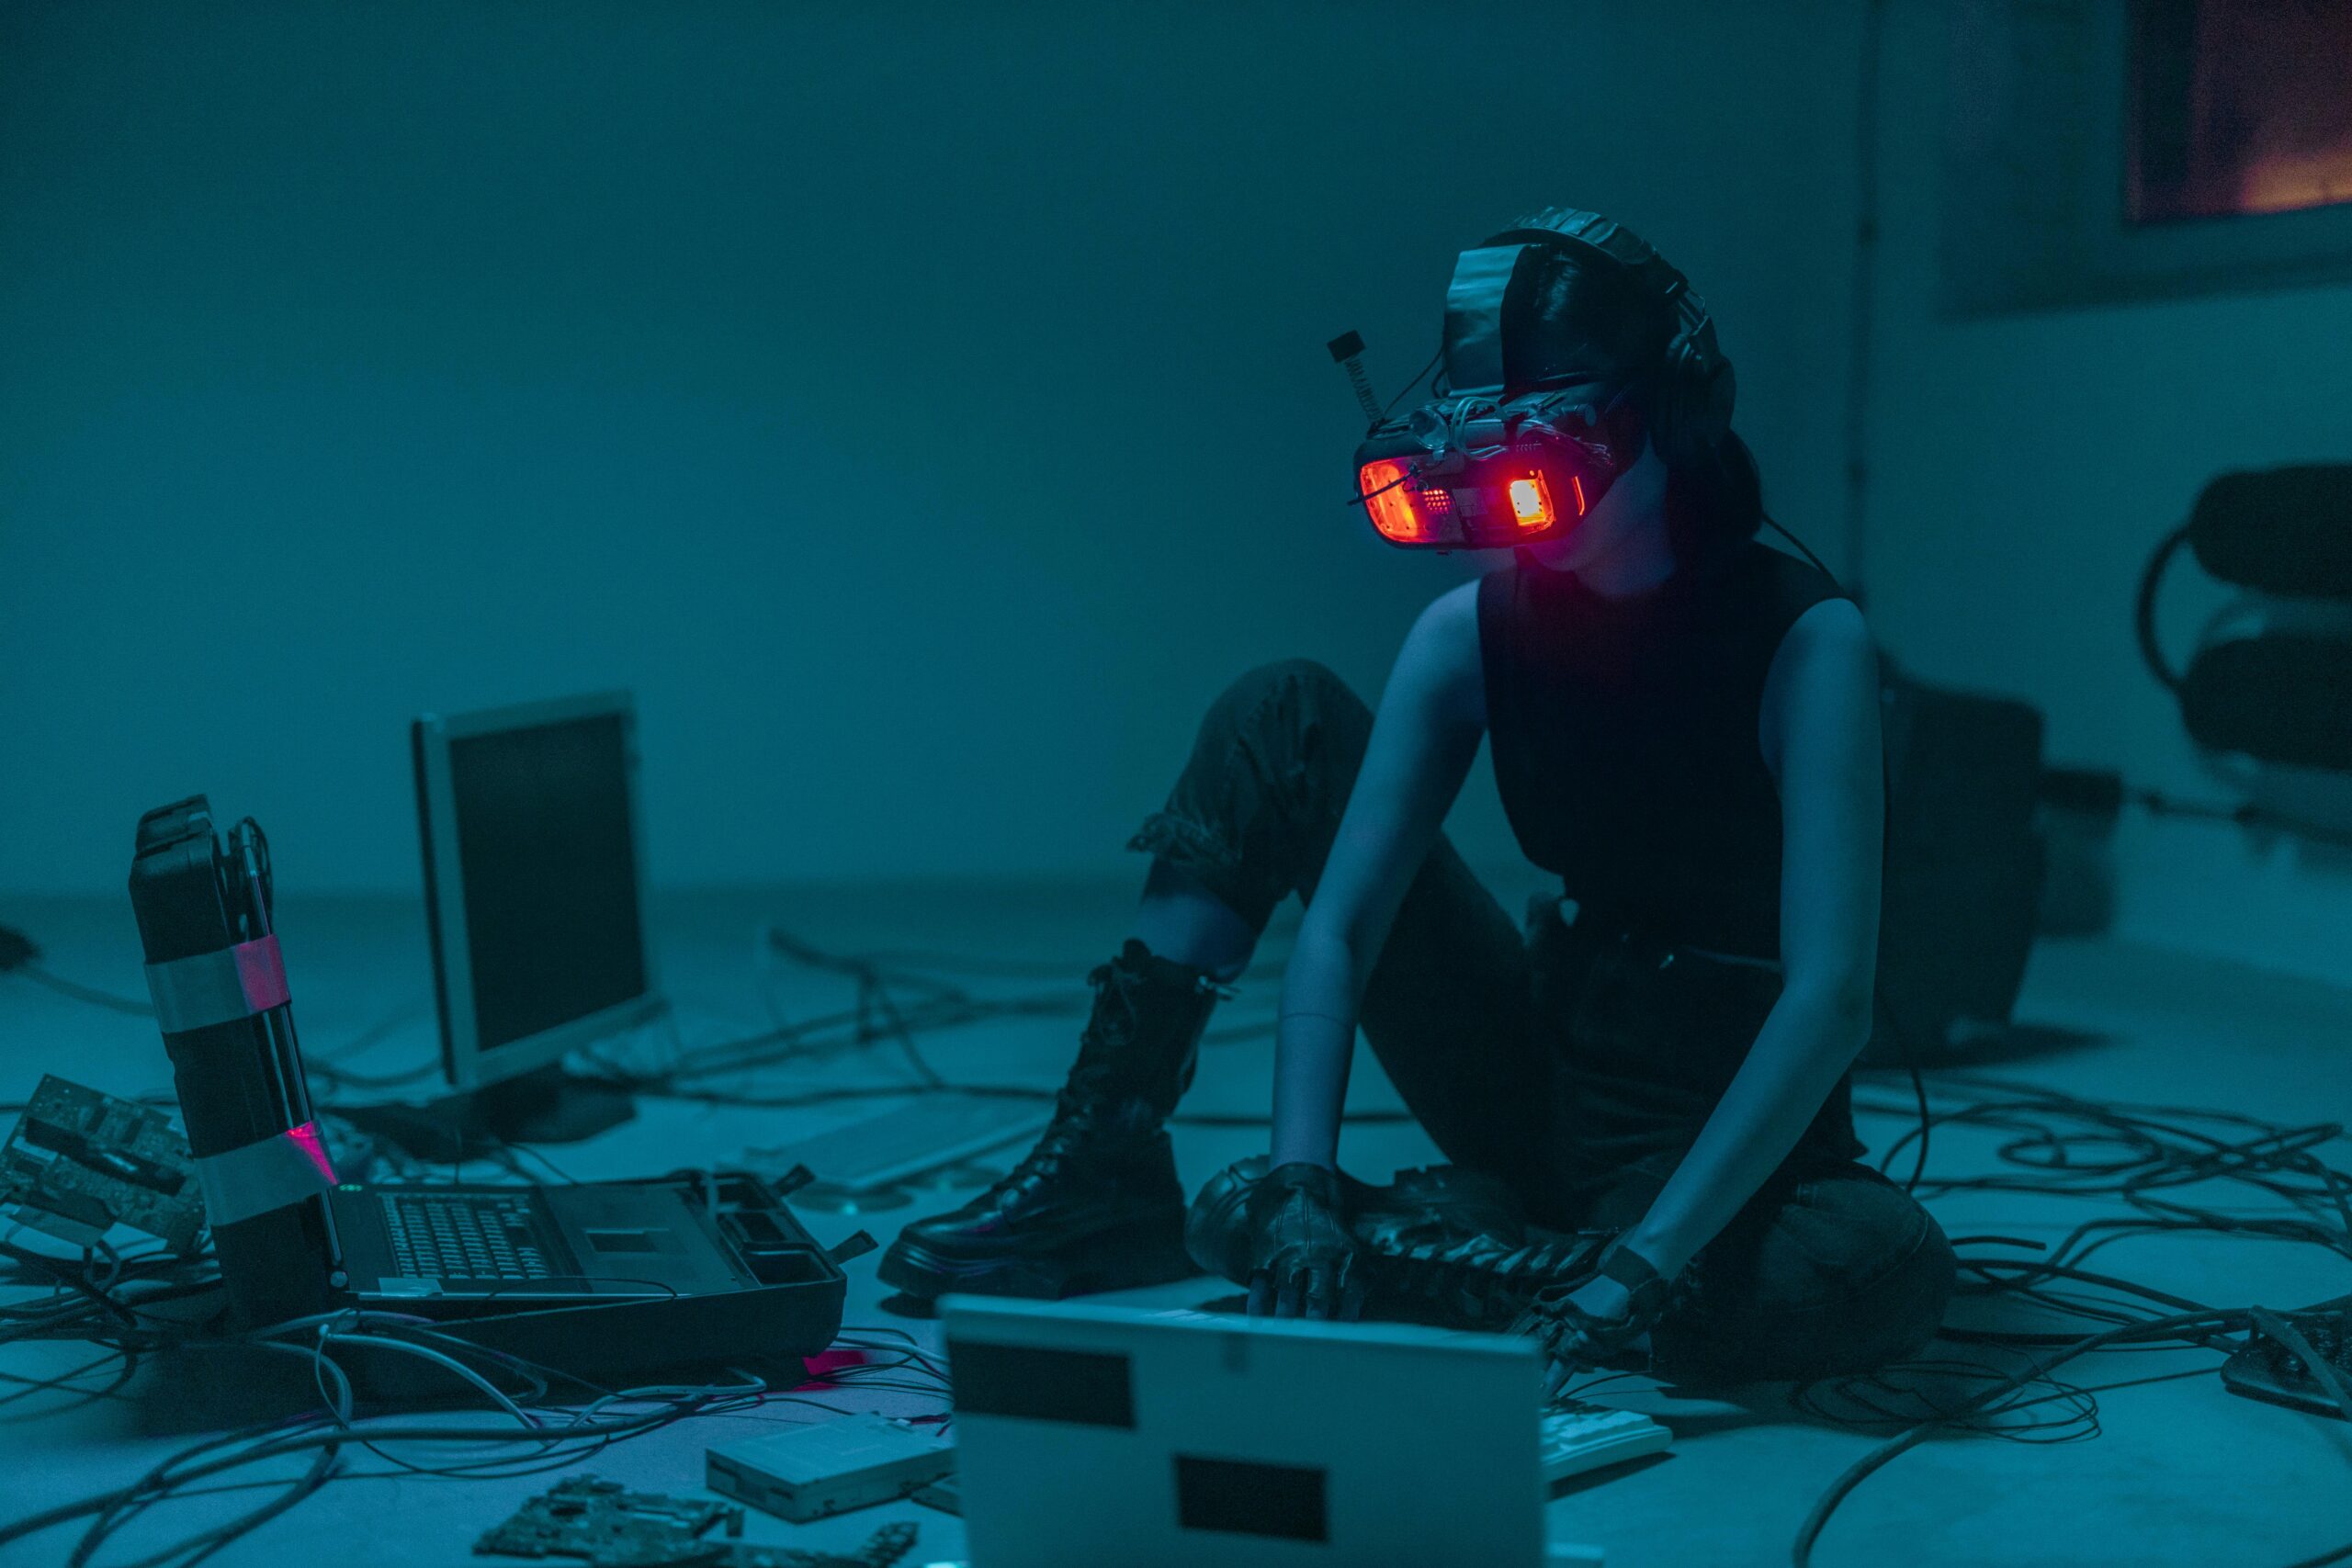 a person wearing a high-tech visor with glowing red lights, sitting next to electronic devices and cables